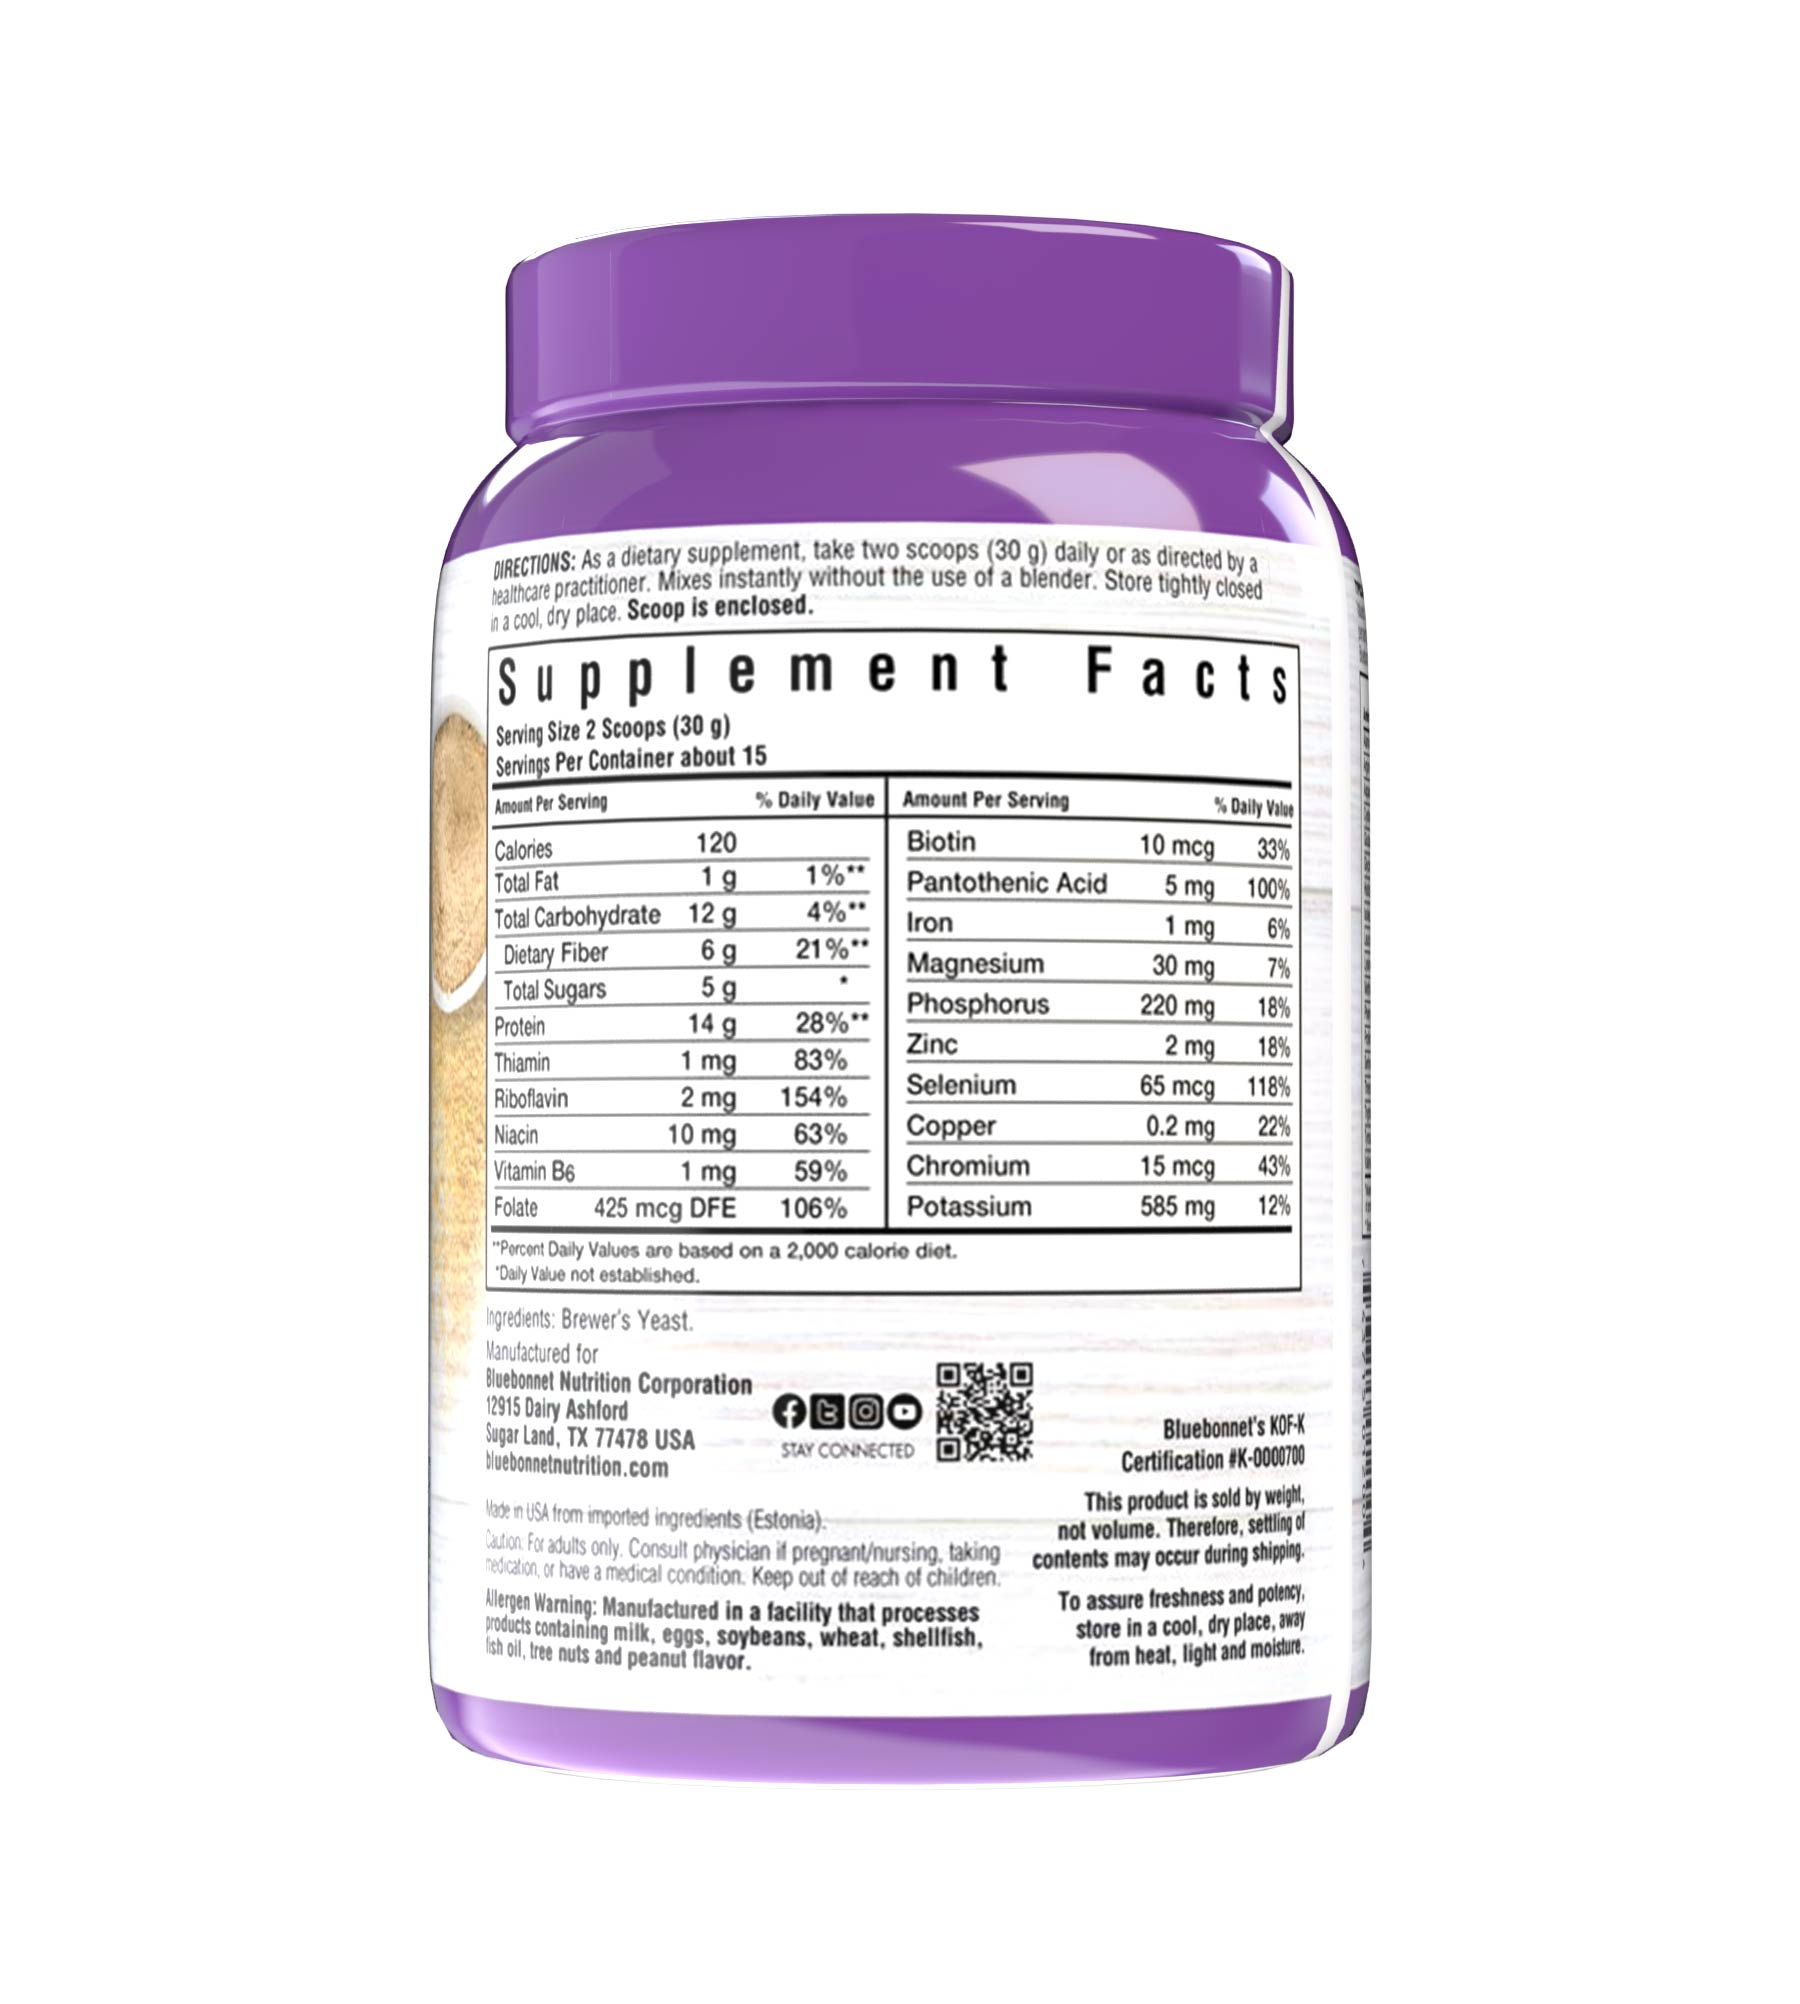 Bluebonnet’s Super Earth® Brewer’s Yeast Powder is formulated with a select strain of Saccharomyces cerevisiae that is carefully grown on certified non-GMO sugar beet molasses instead of the typical grain-derived brewer’s yeast that is recovered from the beer-brewing process. Supplement facts panel. #size_1 lb